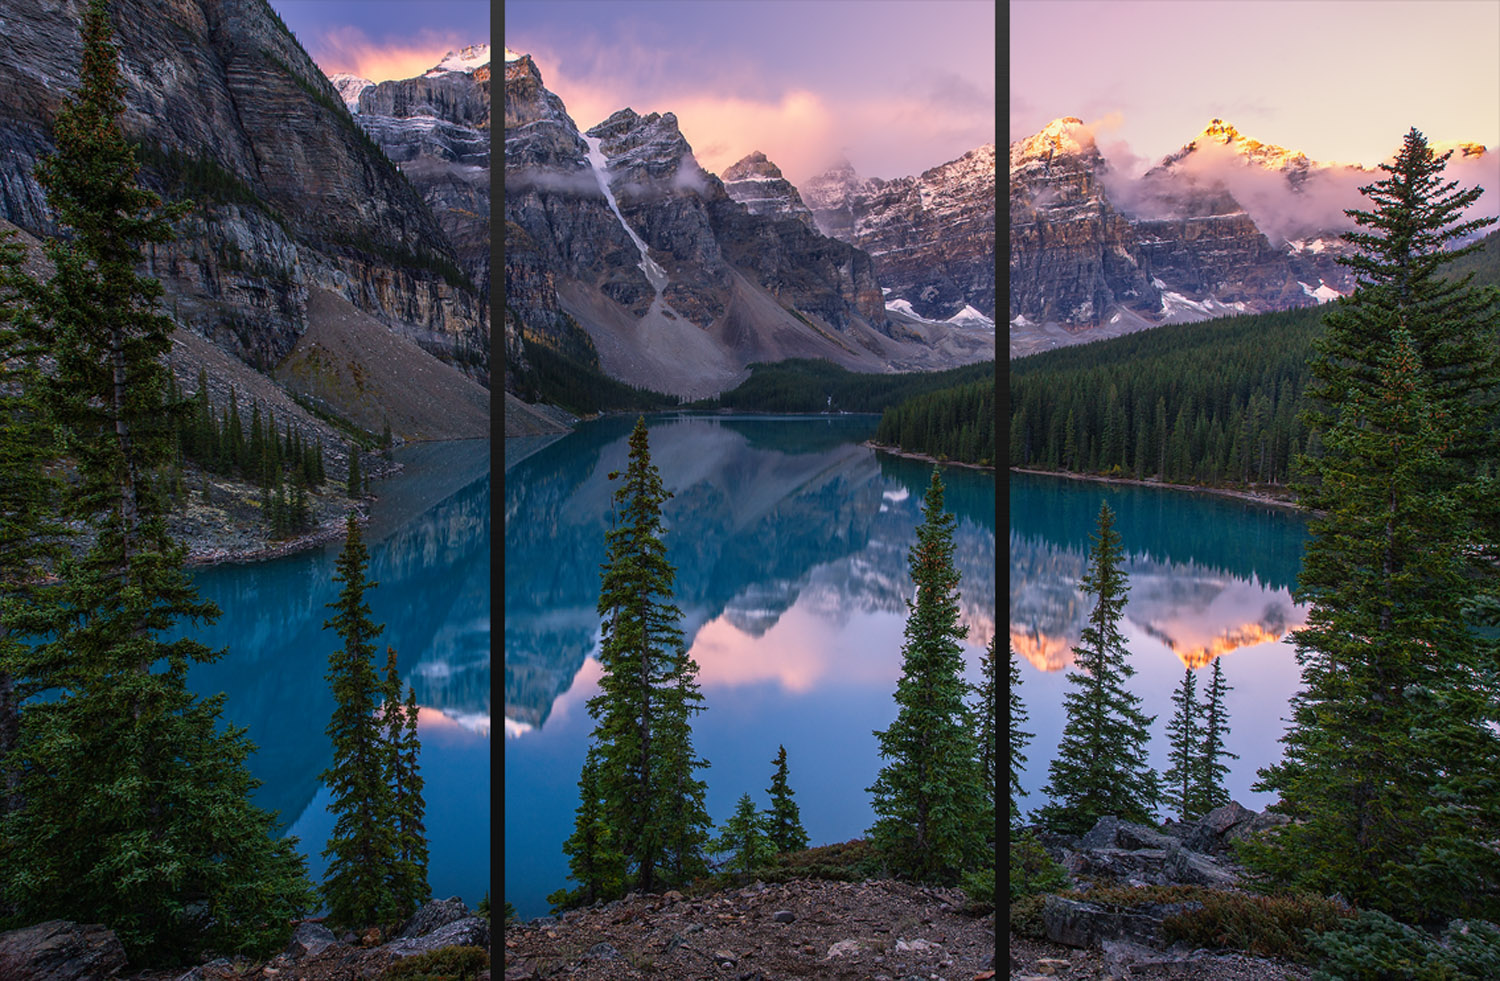 There's a reason Moraine Lake is an icon. The view never gets old.